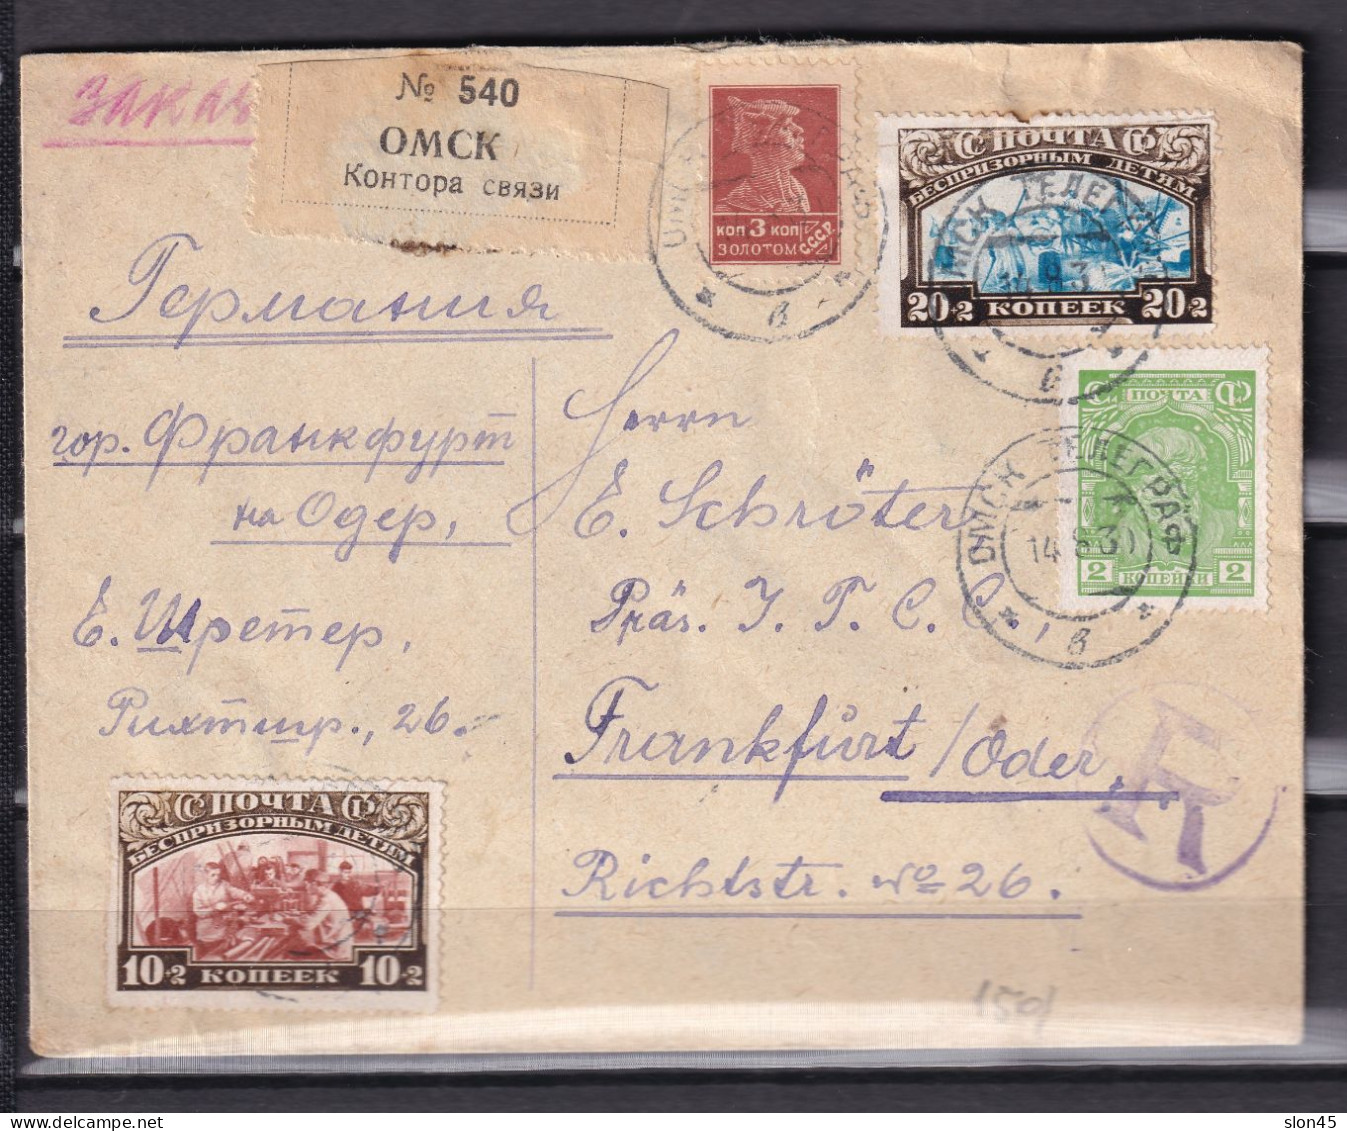 Russia 1930 Registered Cover Omsk To Frankfurt Germany CV 300++ Euro 15257 - Covers & Documents